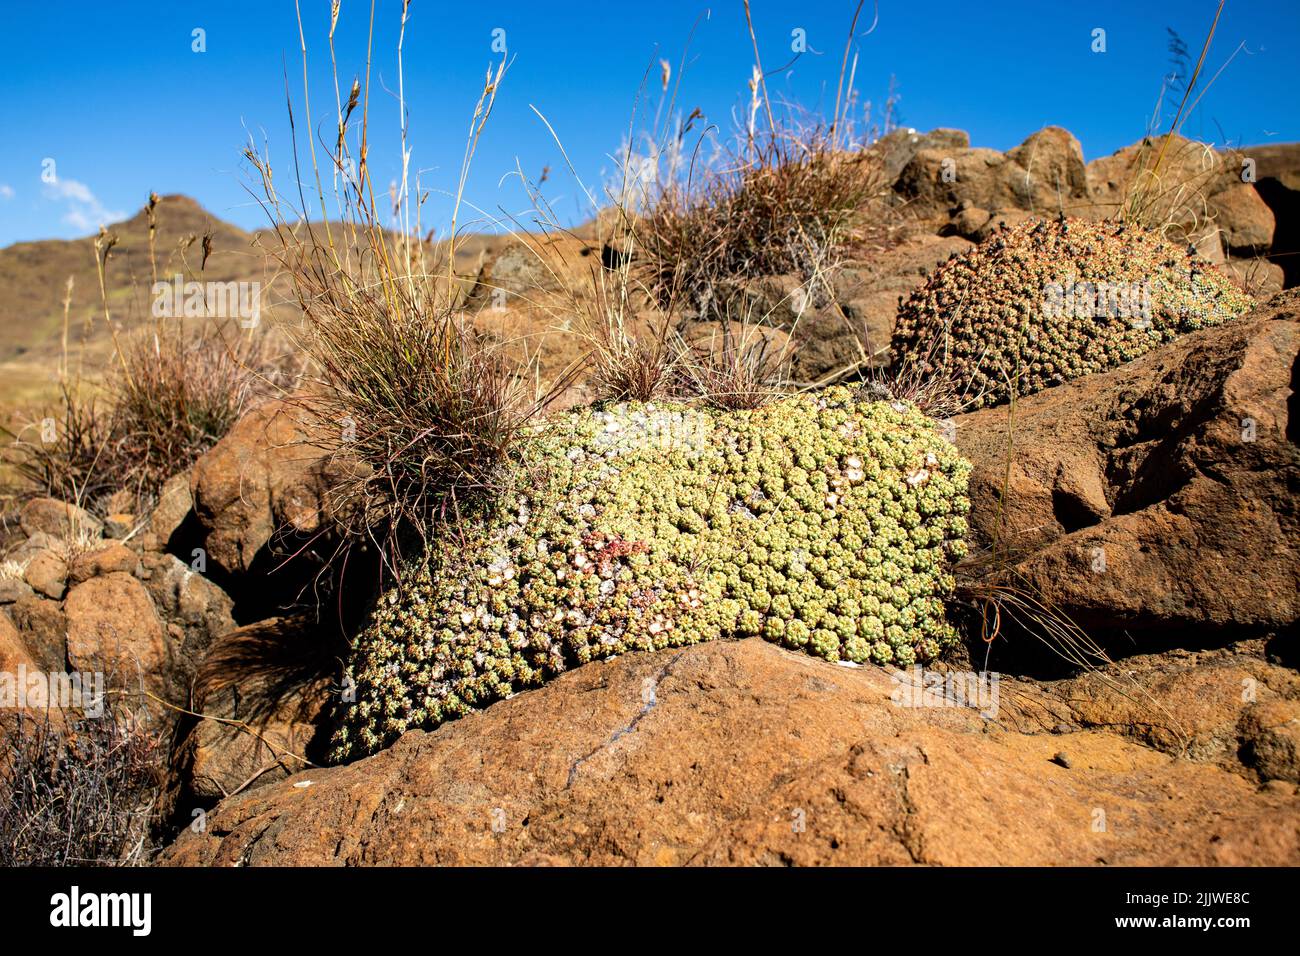 The Raouliaplants and Bouteloua eriopoda plants growing in the middle of rocks against blue sky Stock Photo